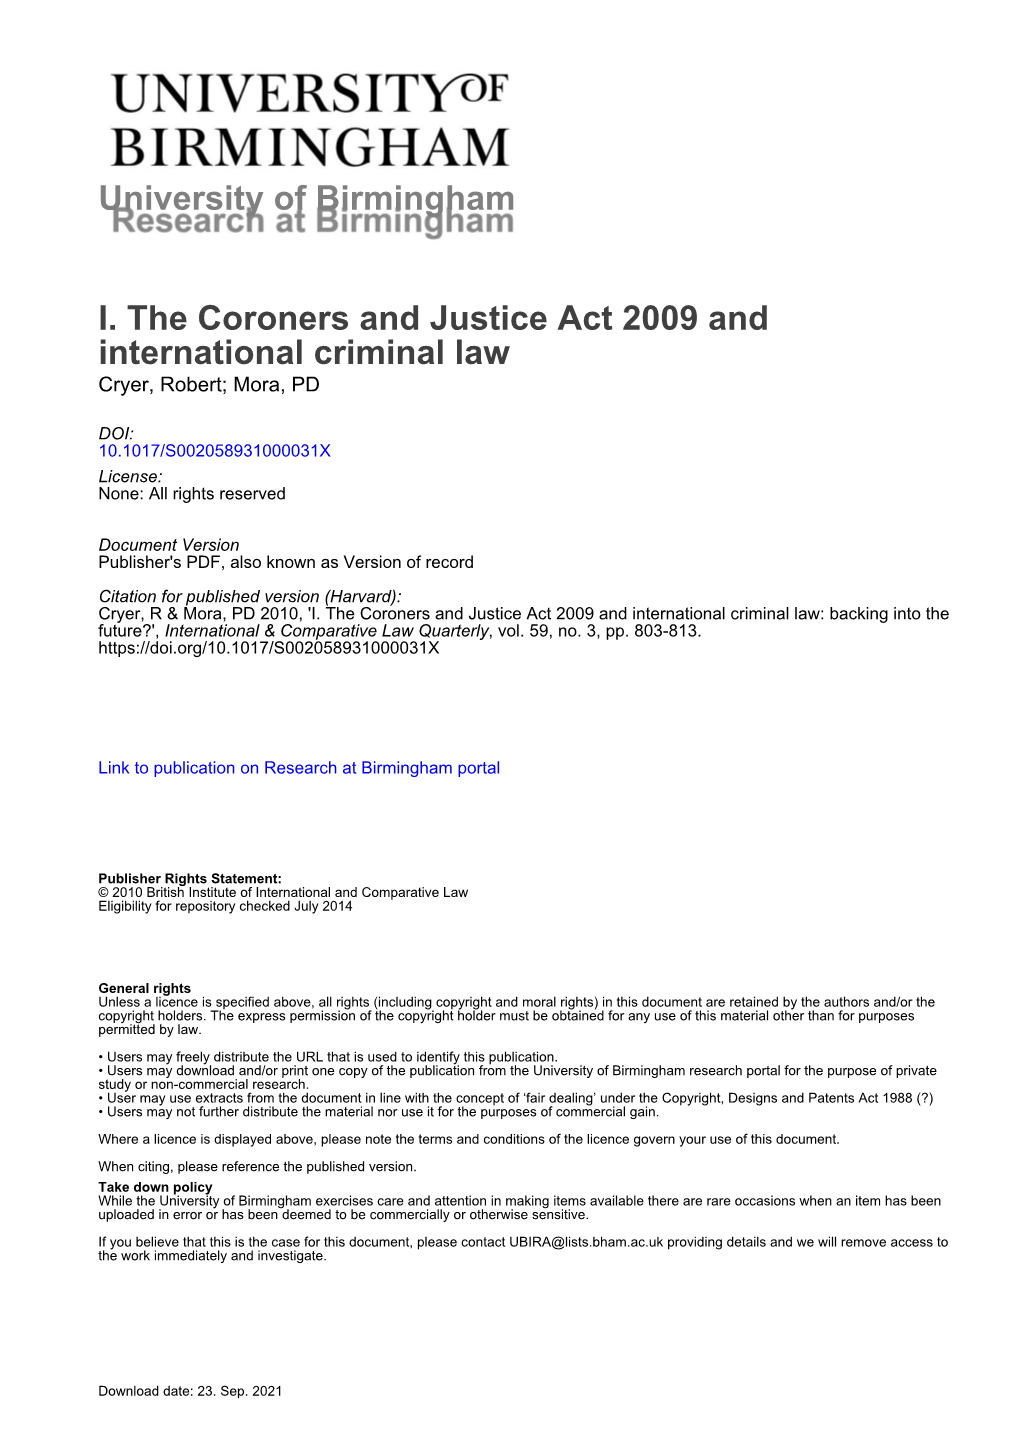 I. the Coroners and Justice Act 2009 and International Criminal Law Cryer, Robert; Mora, PD